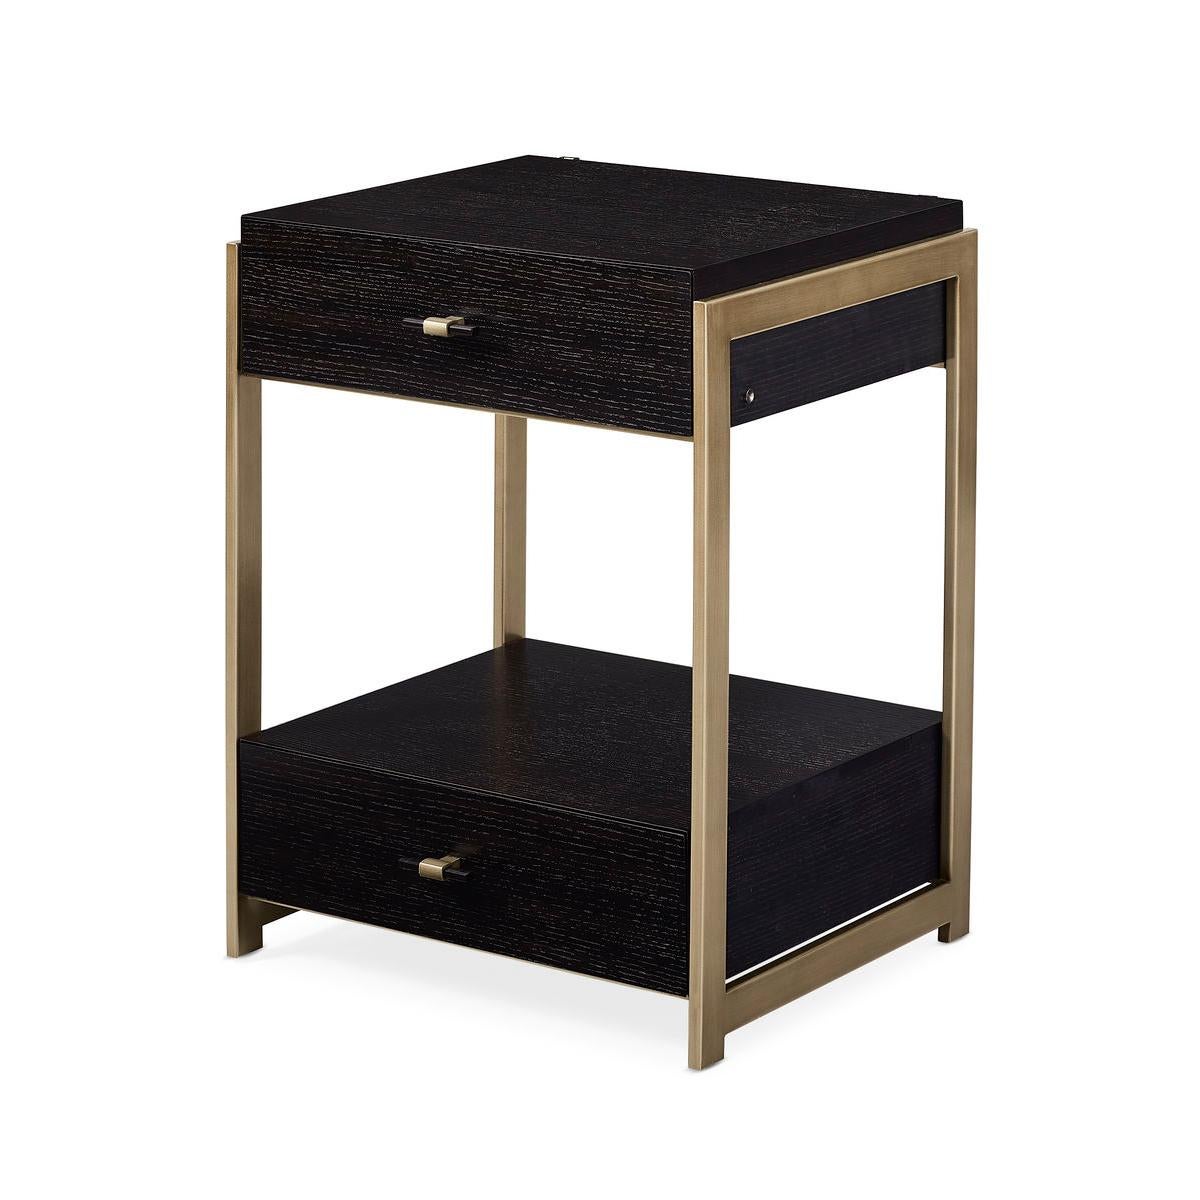 Its geometric profile feels architectural and is accentuated by a rich black stained Ash finish. Bronze highlights its metal frame and angular legs while adding a hint of warmth. With two drawers and an open storage area, this nightstand offers